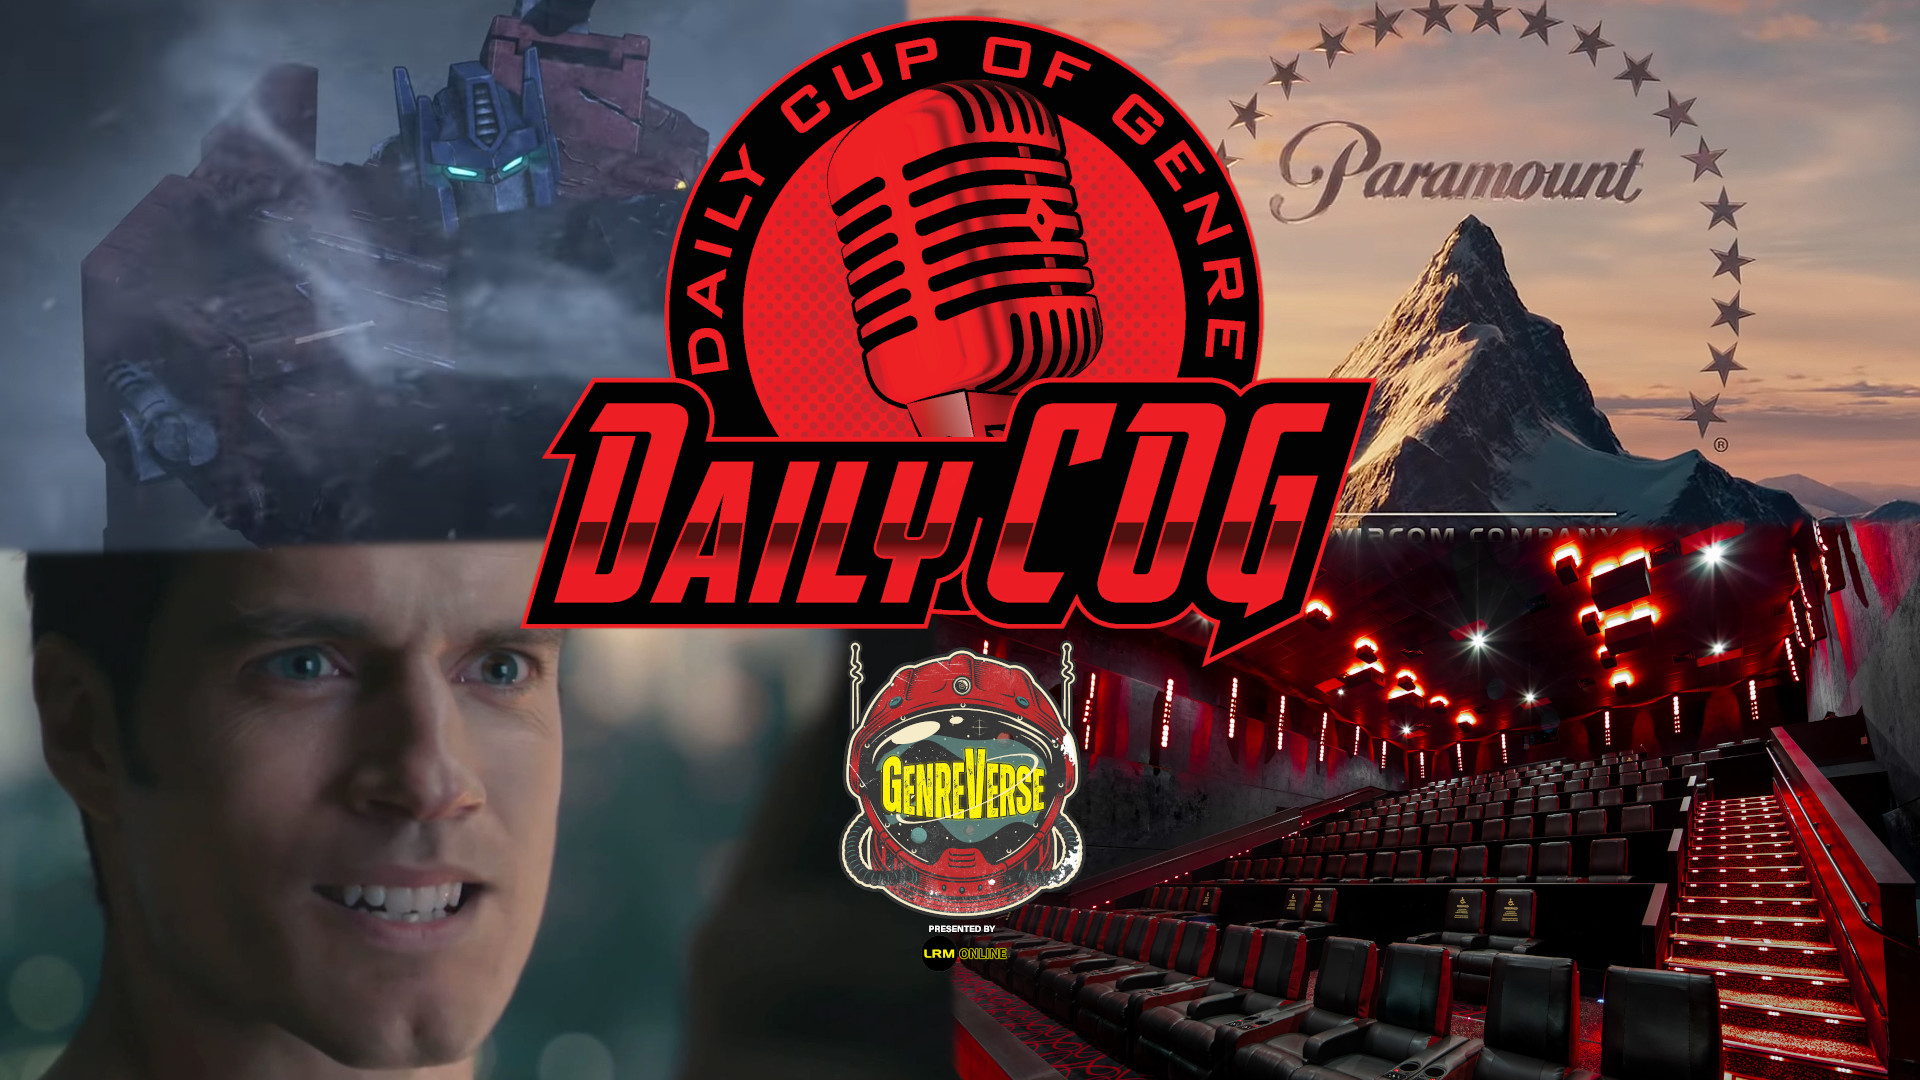 Weekend Box Office, Paramount Release Date Delays, New Animated Transformers Movie, And Fixing Old/Bad CGI & FX | Daily COG